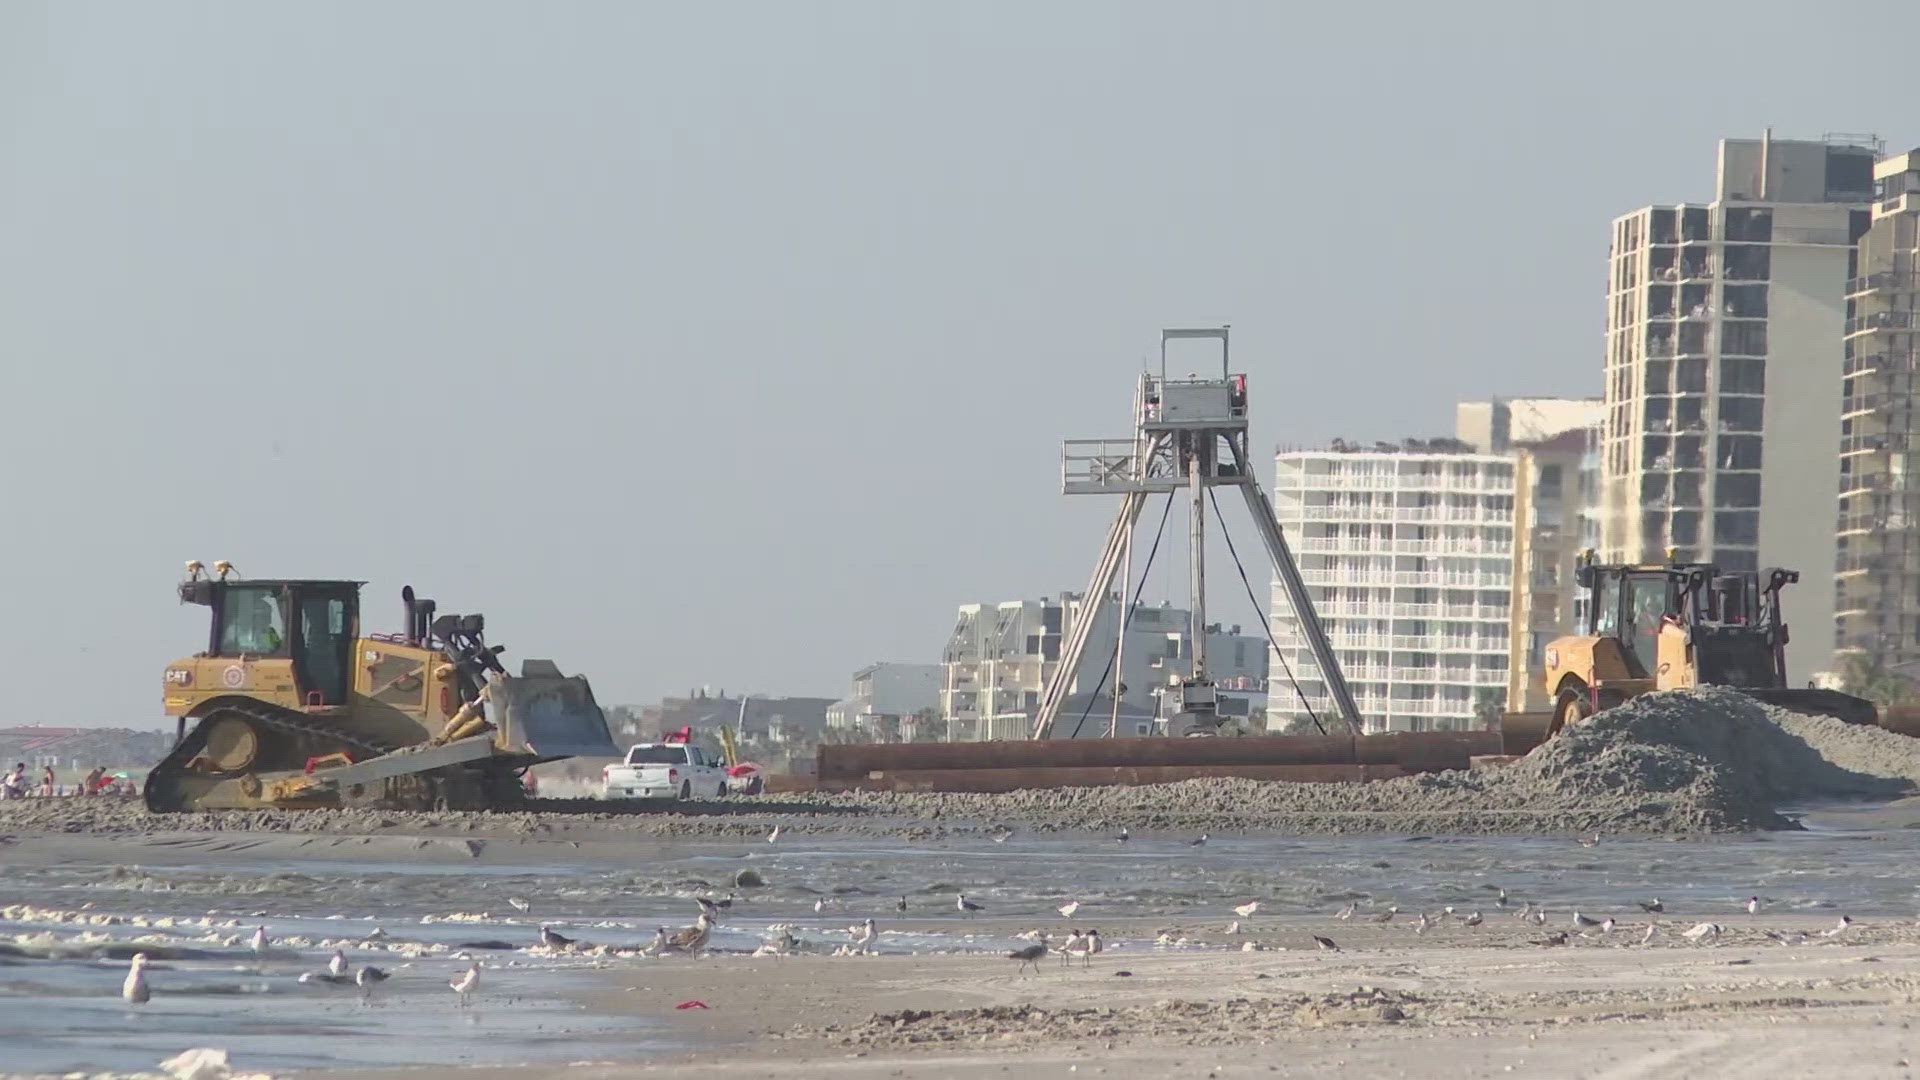 Once the project is completed, the beach will be broader and wider, something officials say will increase protection during hurricane season and help the ecosystem.